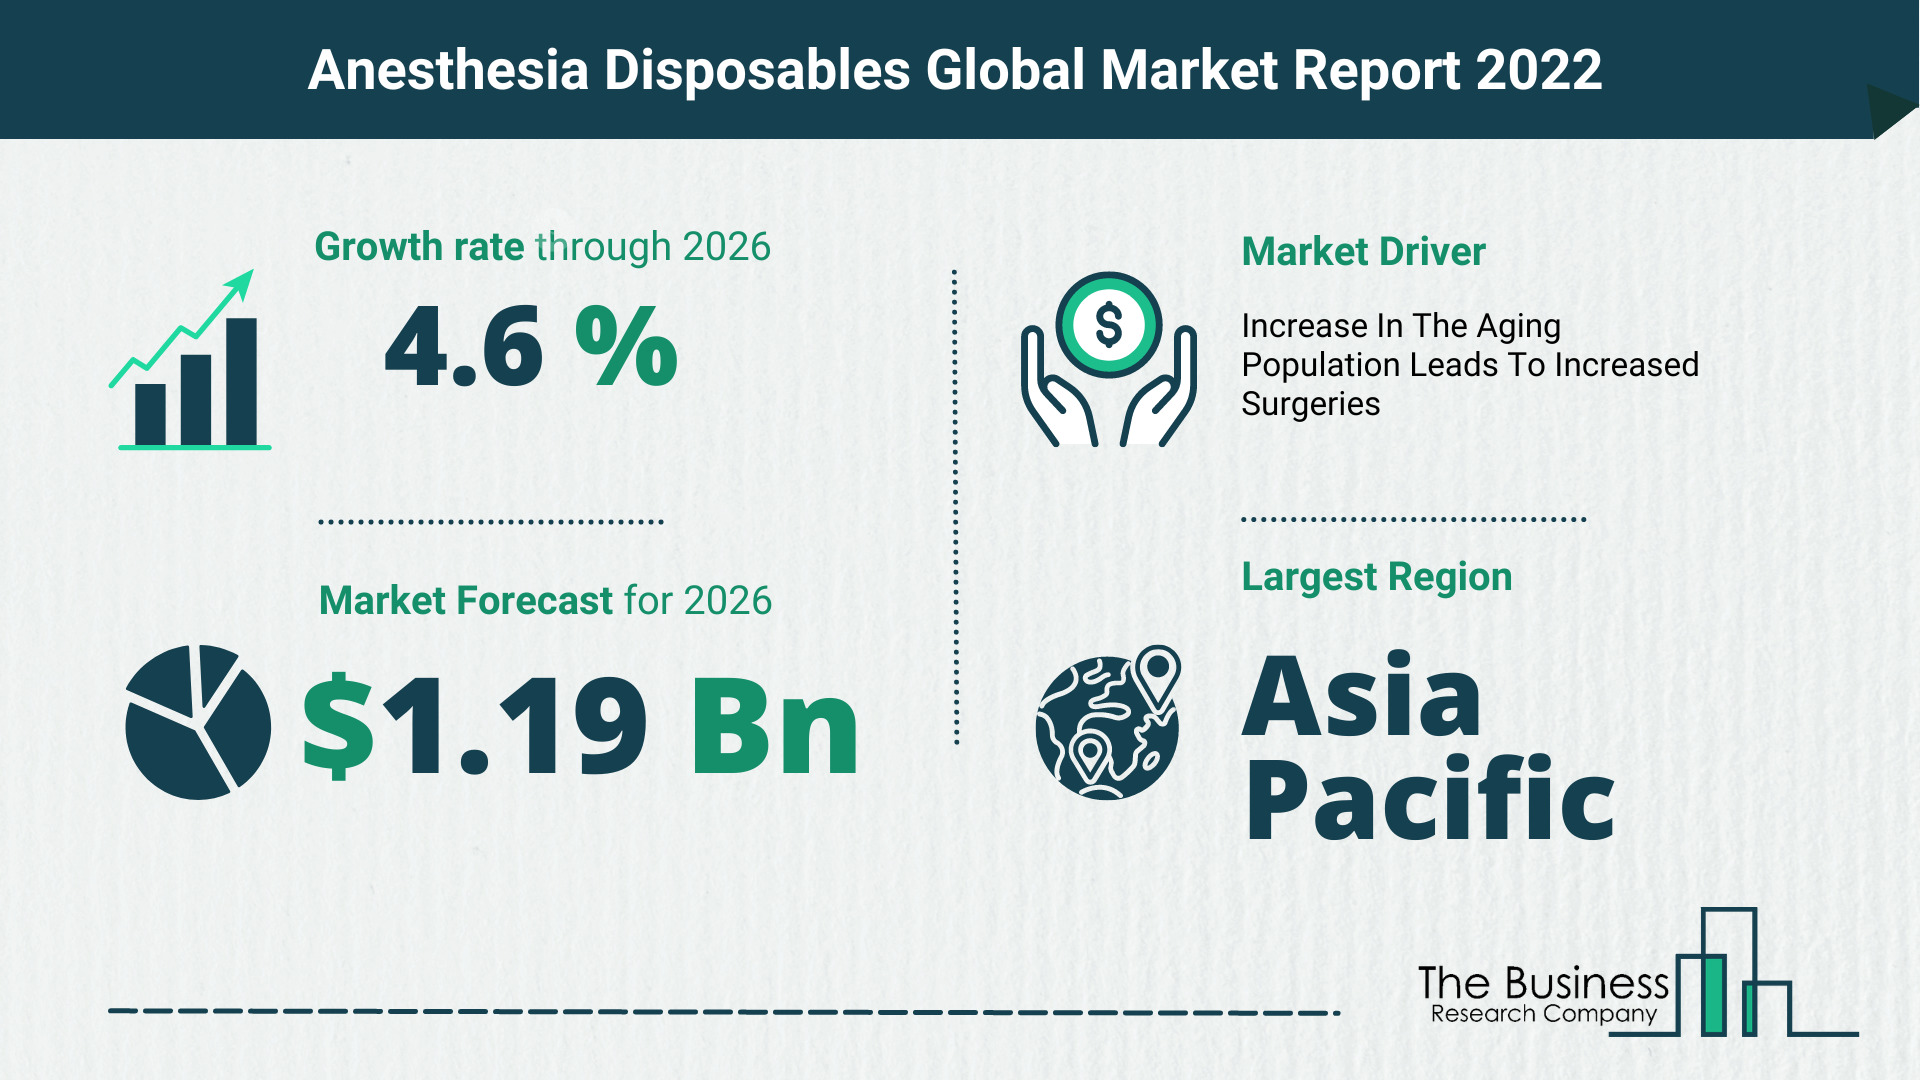 Global Anesthesia Disposables Market 2022 – Market Opportunities And Strategies